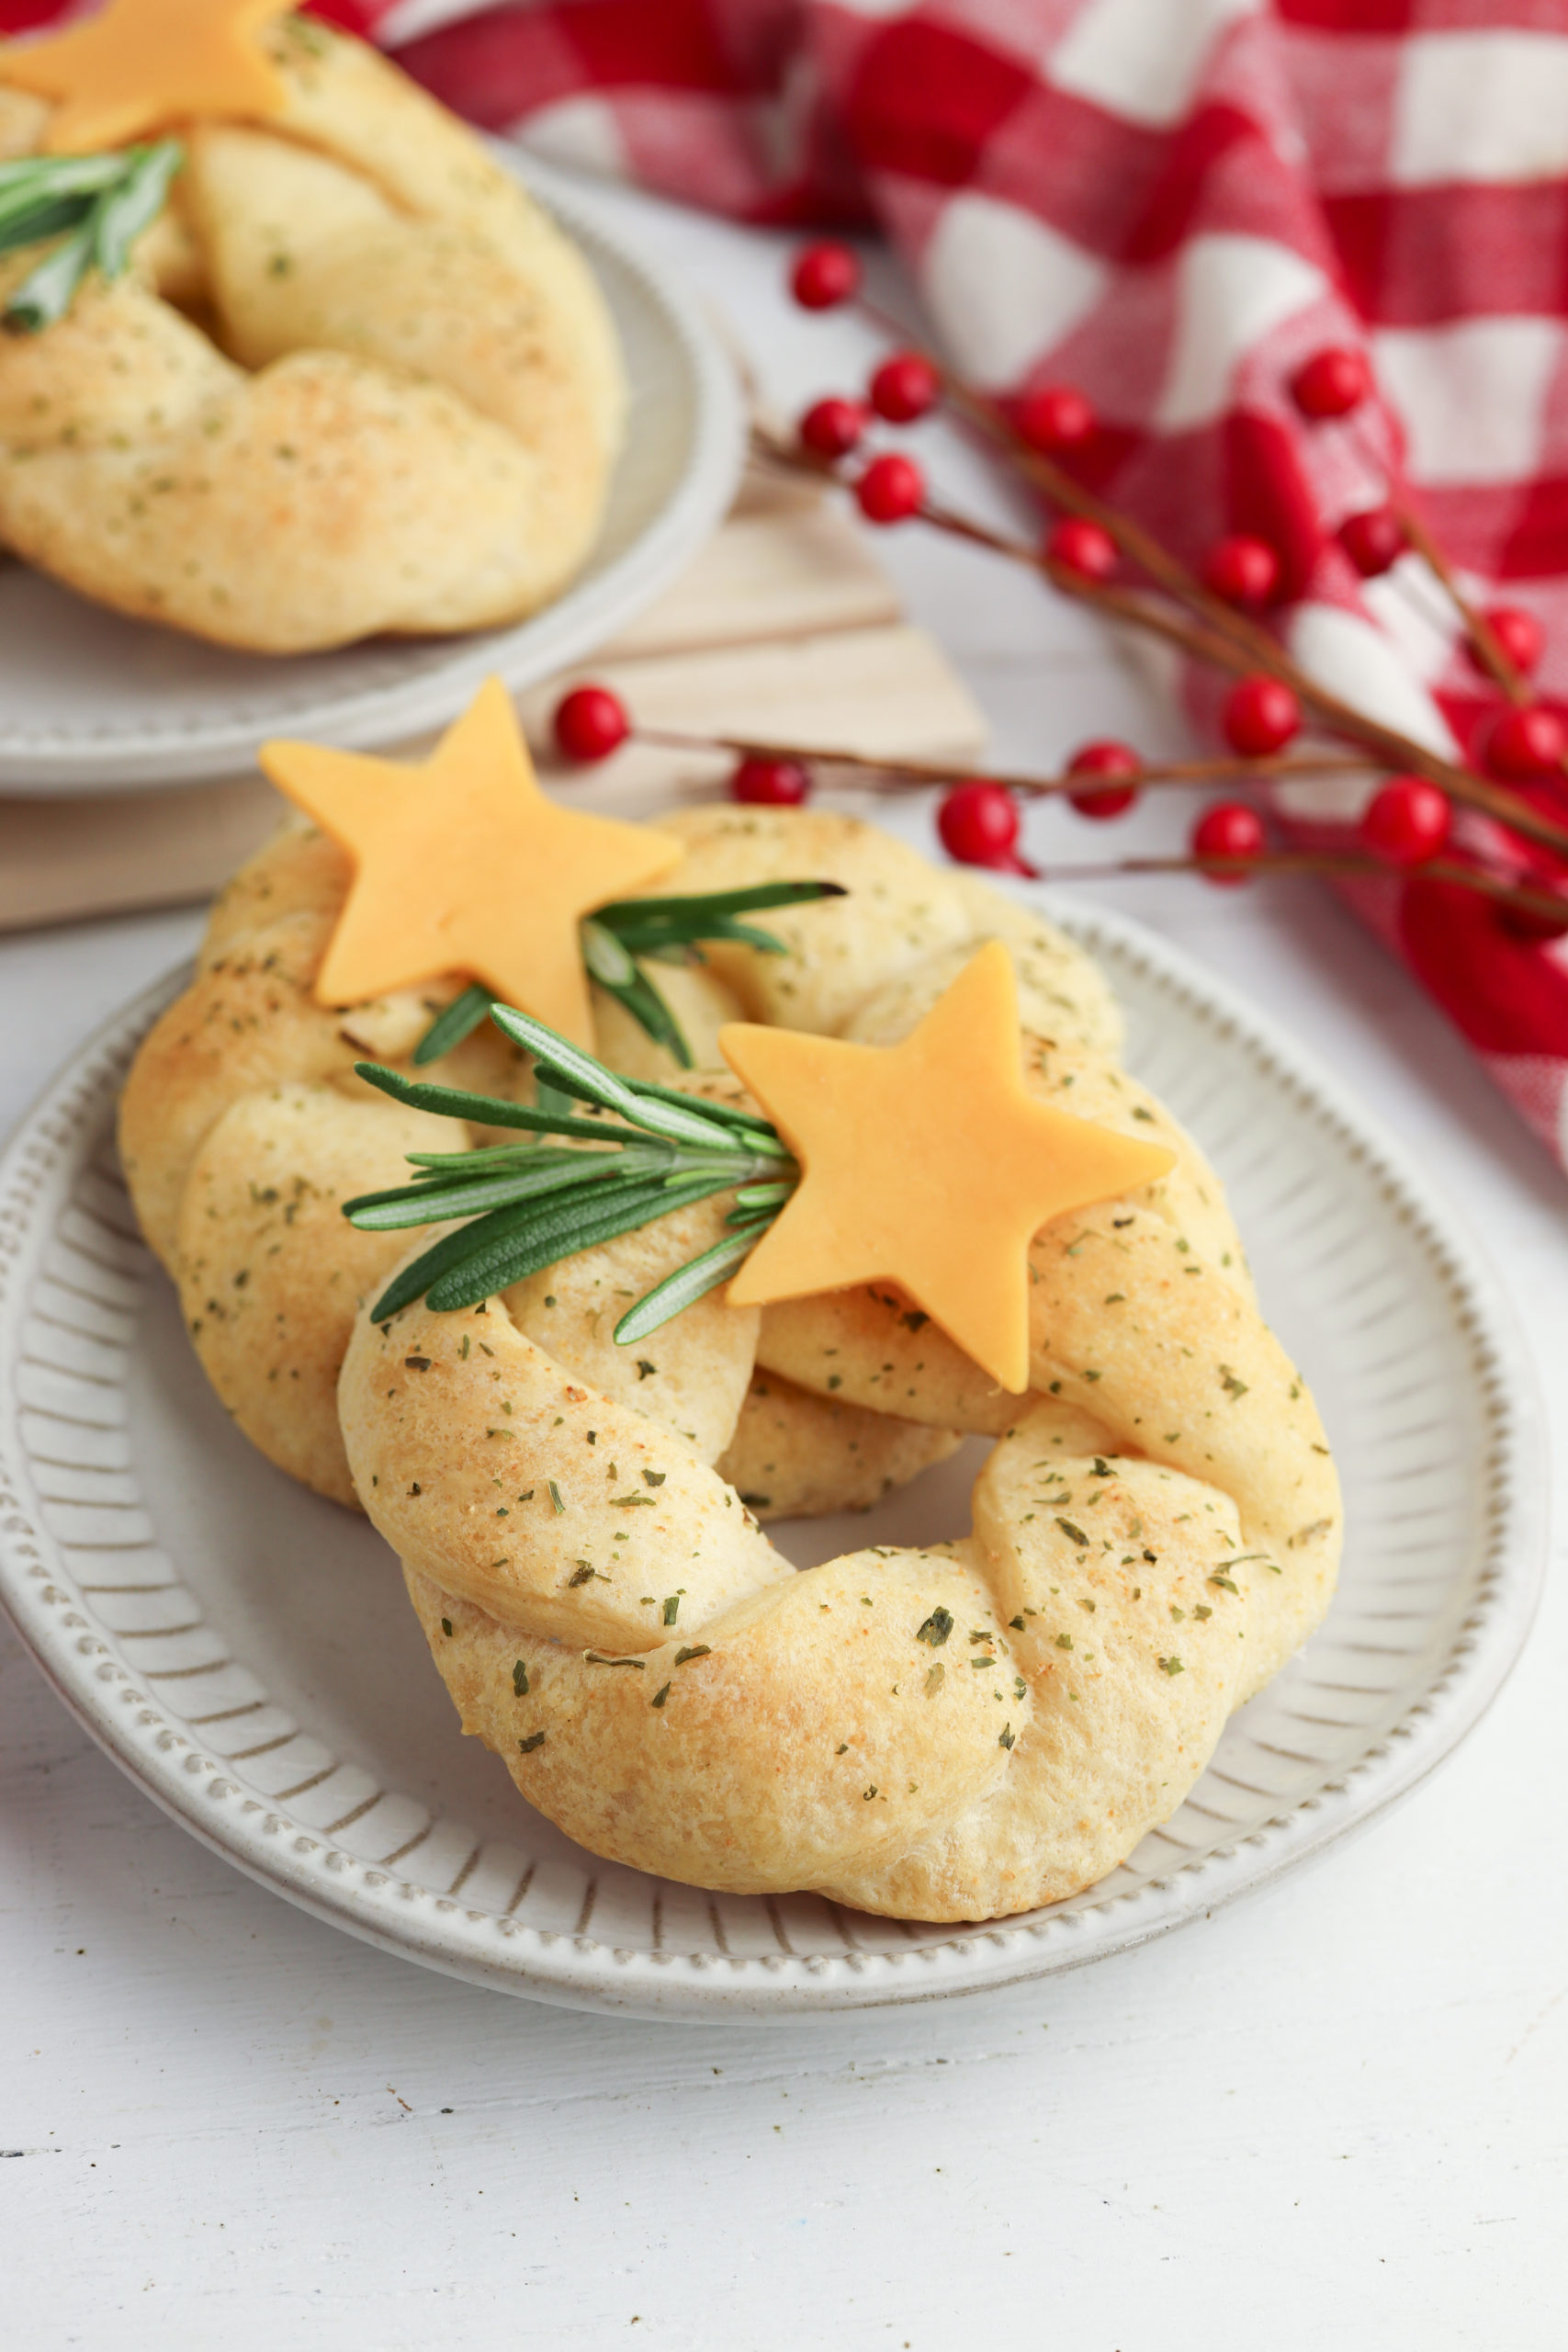 Crescent roll wreaths on a plate with rosemary sprig and cheese star